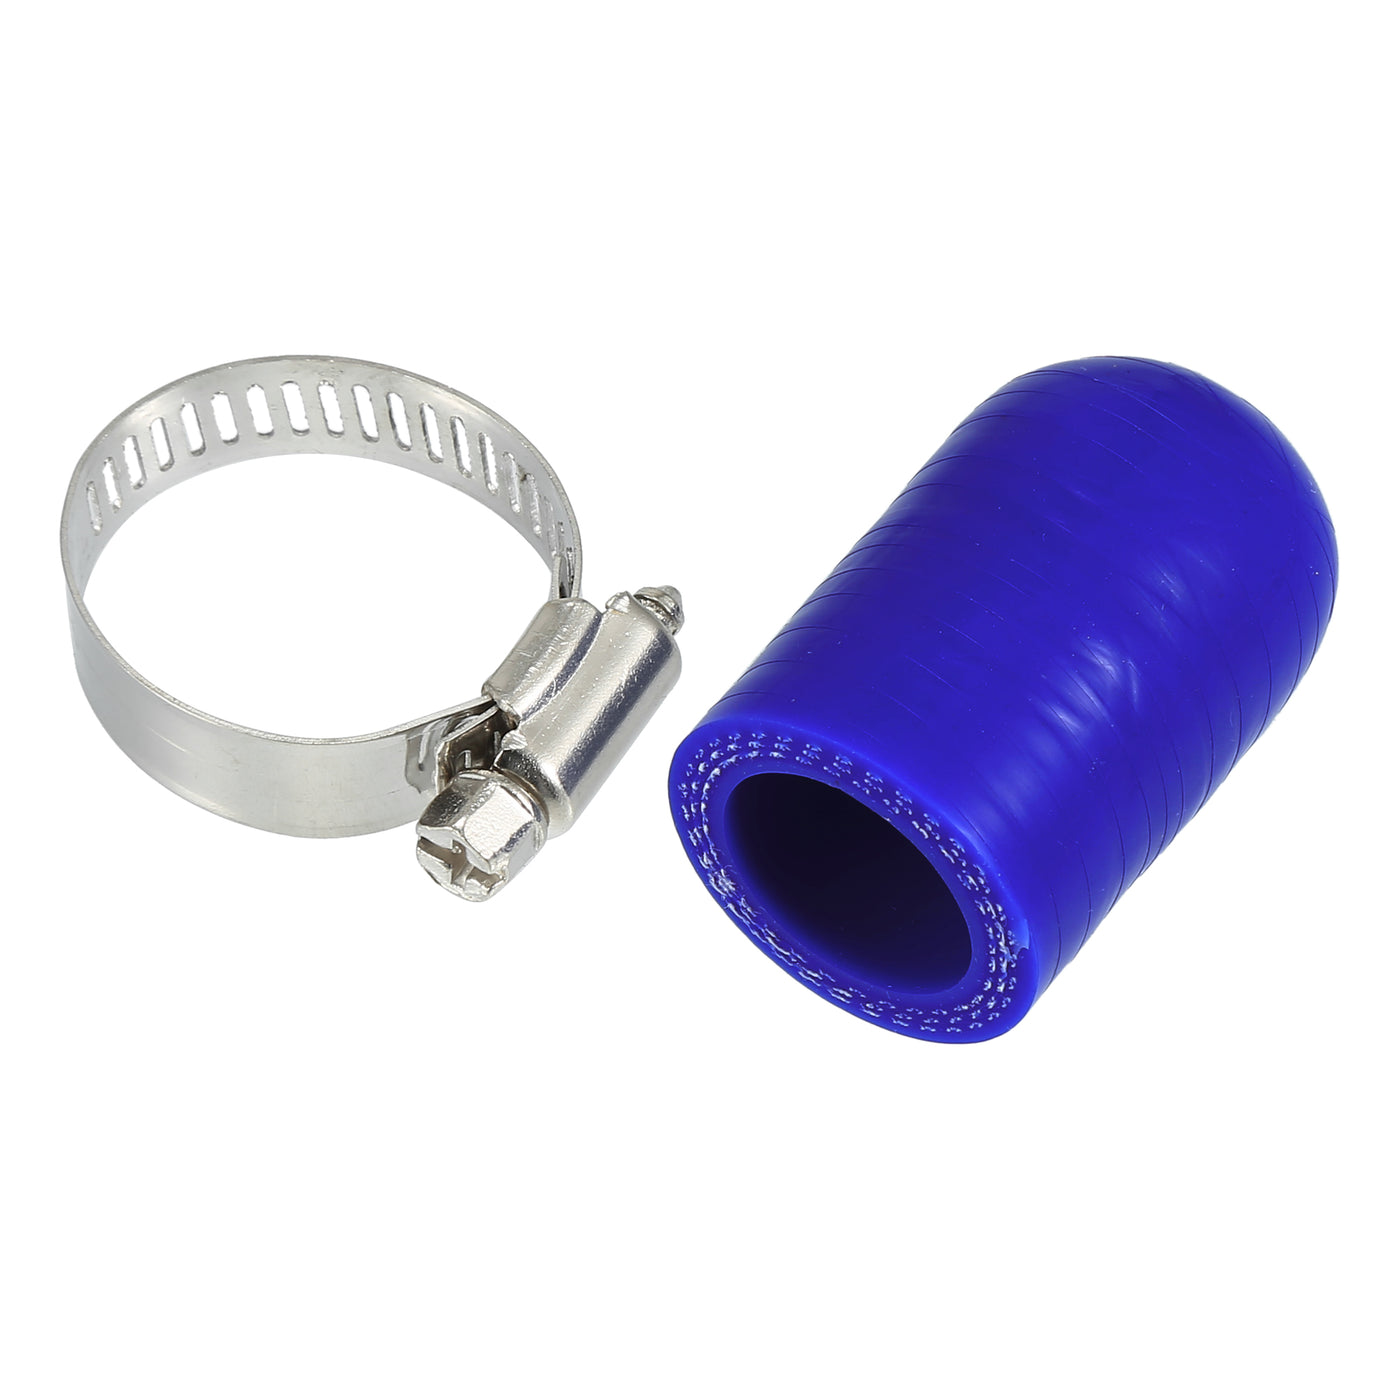 X AUTOHAUX 1 Set 30mm Length 20mm/0.79" ID Blue Car Silicone Rubber Hose End Cap with Clamps Silicone Reinforced Blanking Cap for Bypass Tube Universal